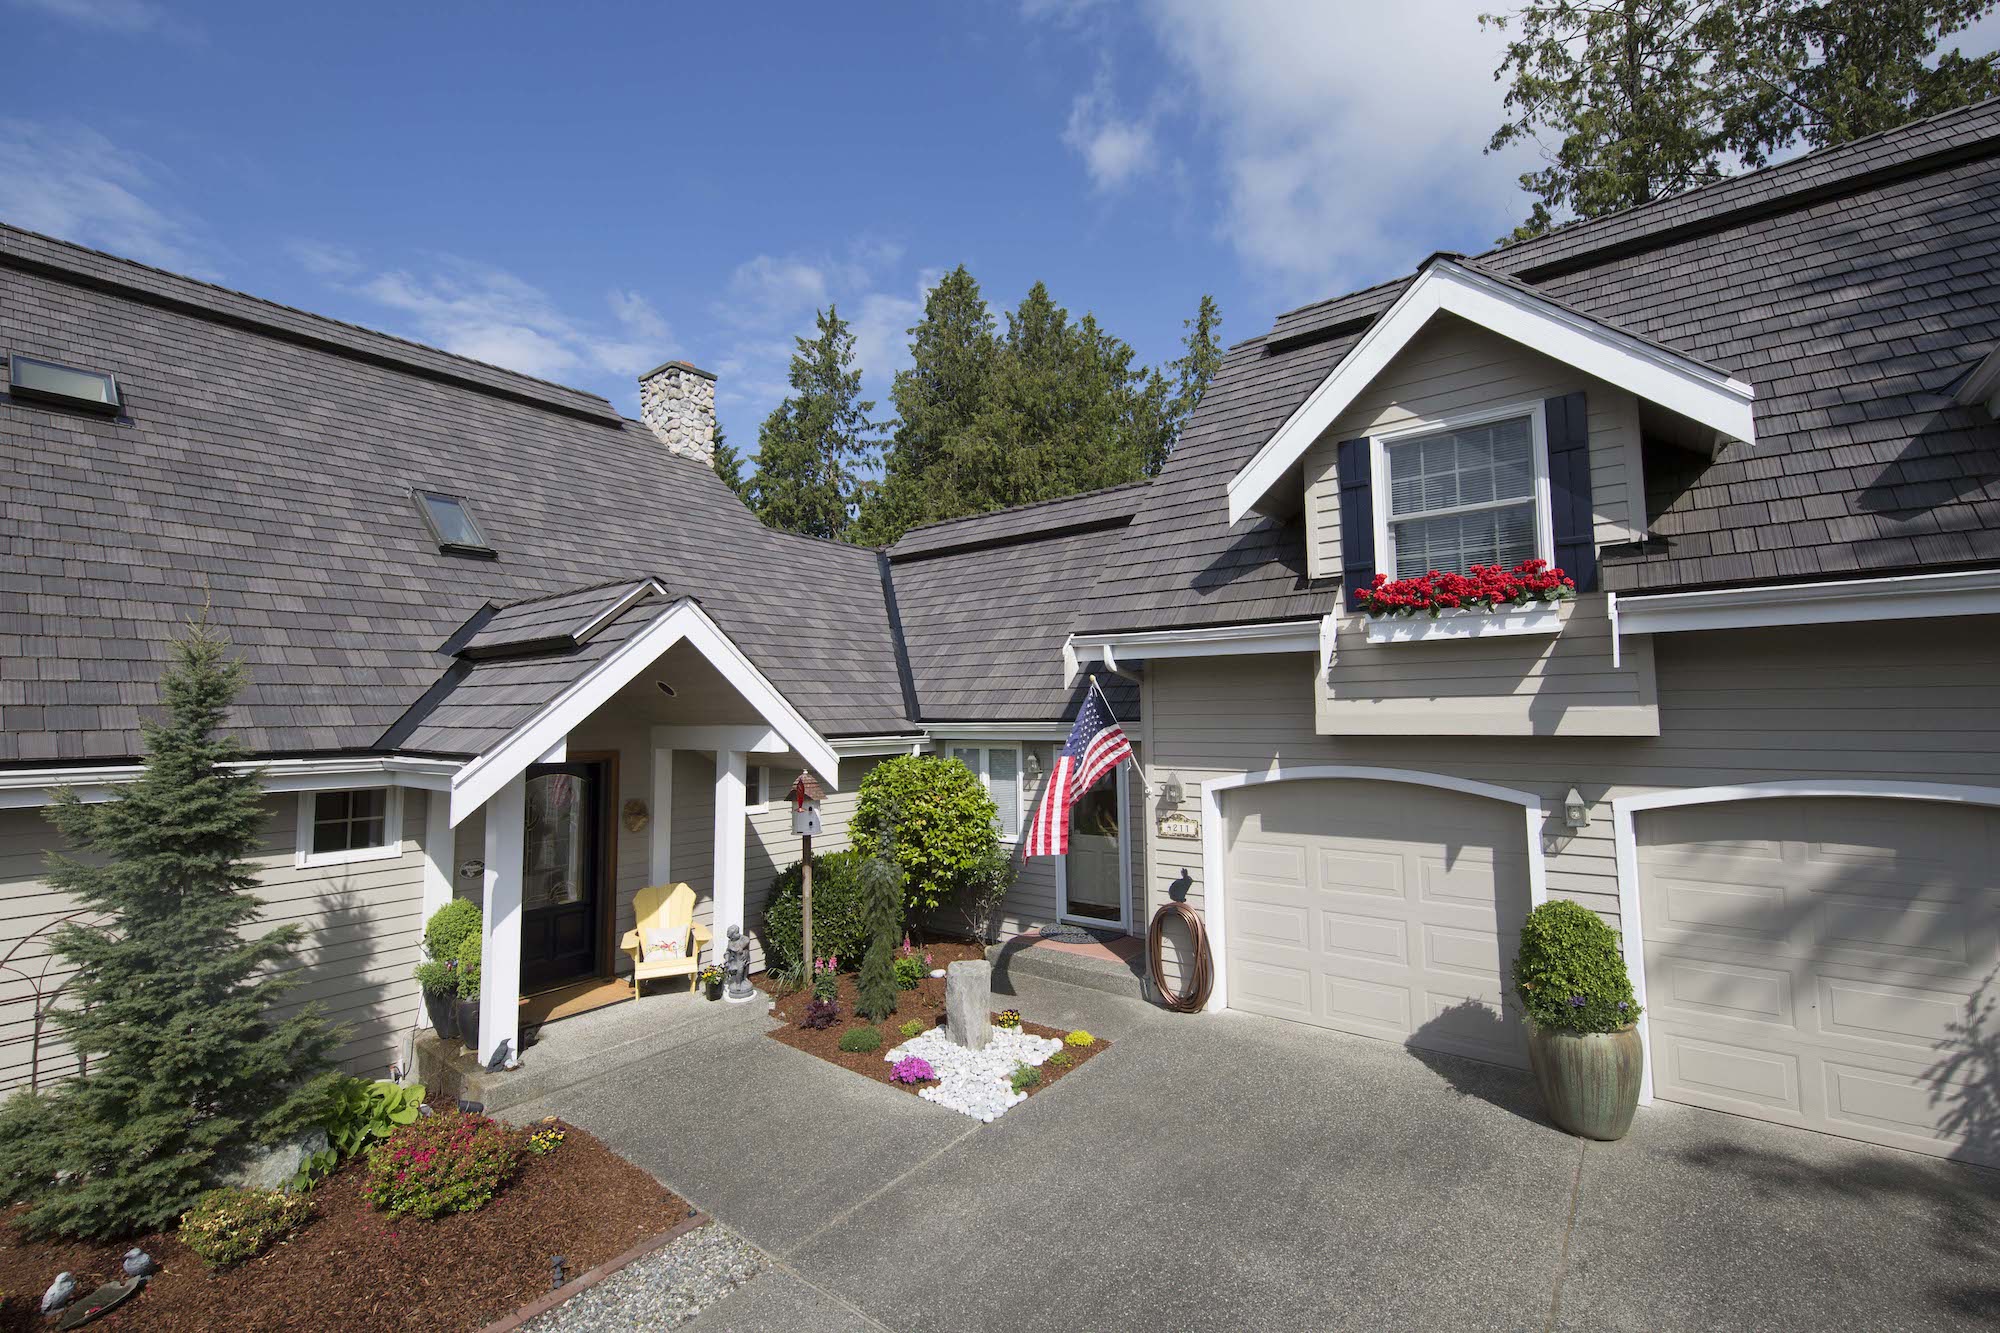 Composite Roofing Image